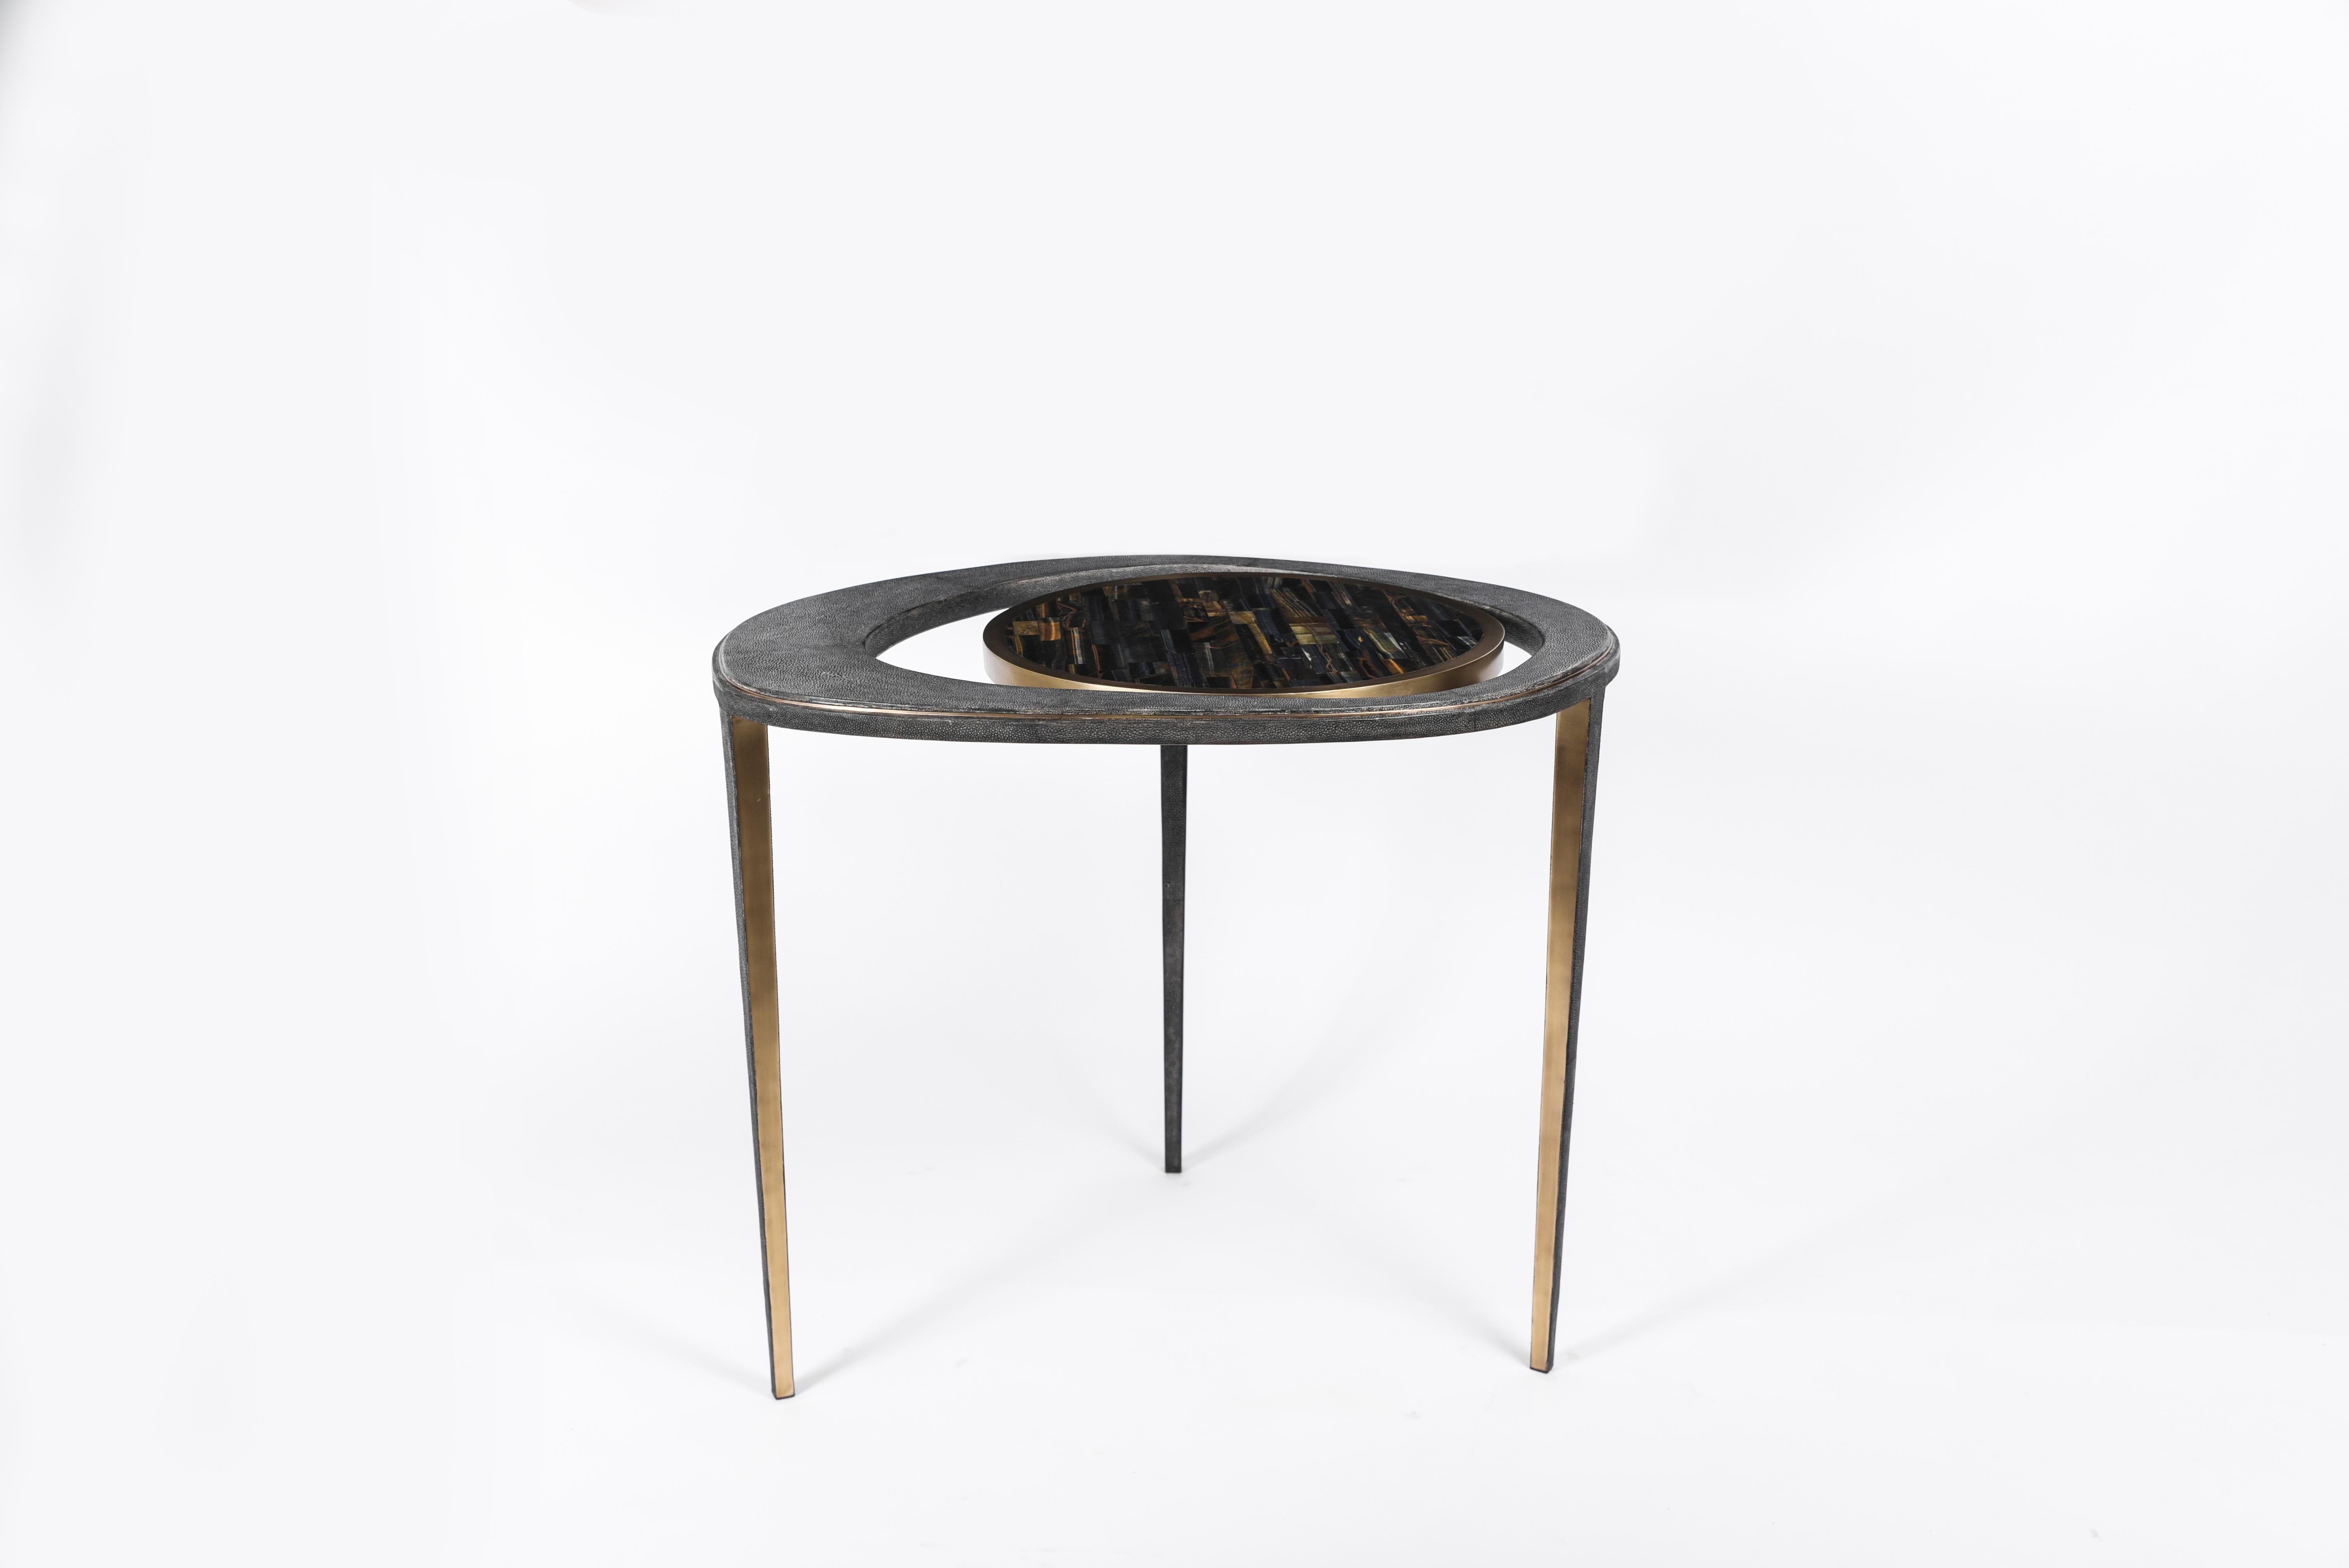 Contemporary Set of 3 Peacock Nesting Tables in Shagreen Hwana, and Brass by R&Y Augousti For Sale